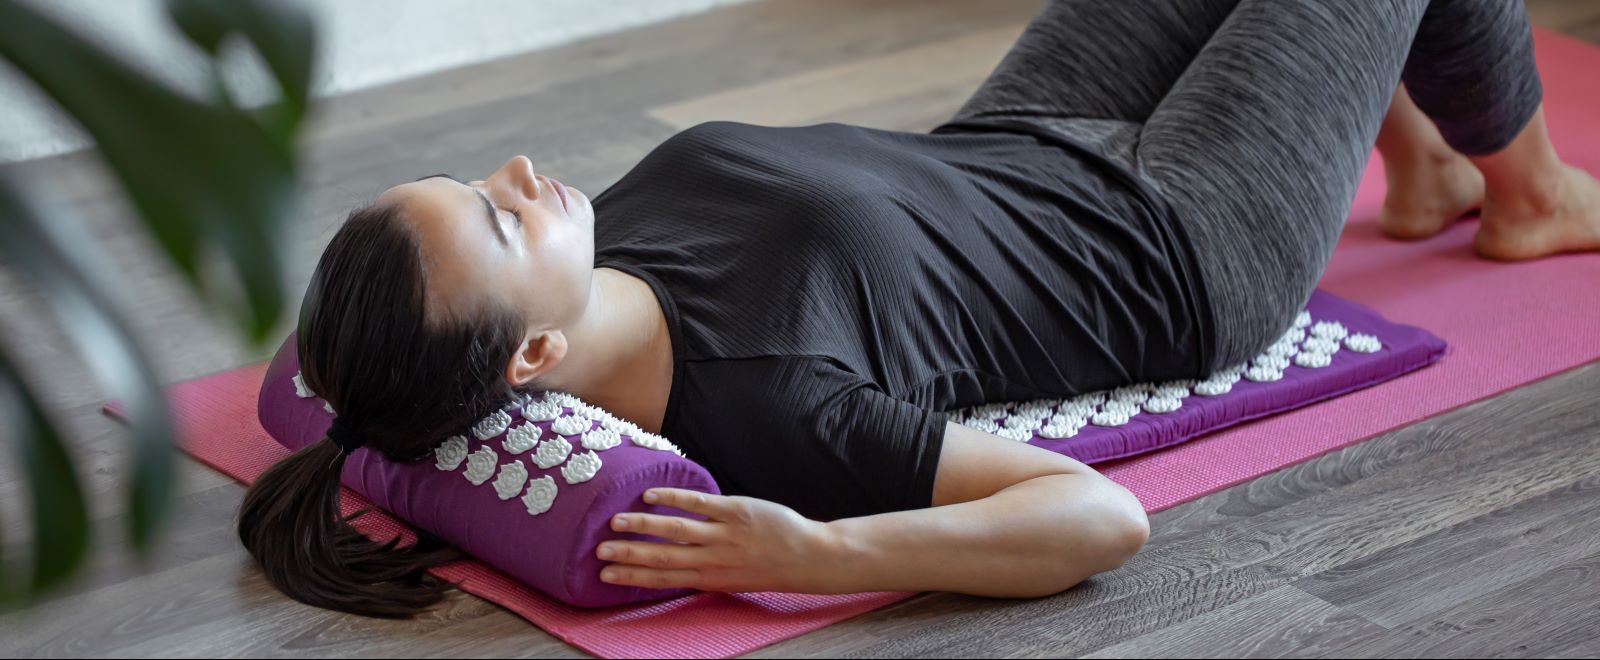 Acupressure mats - which look like yoga mats covered in small plastic spikes - may offer similar results to acupuncture.